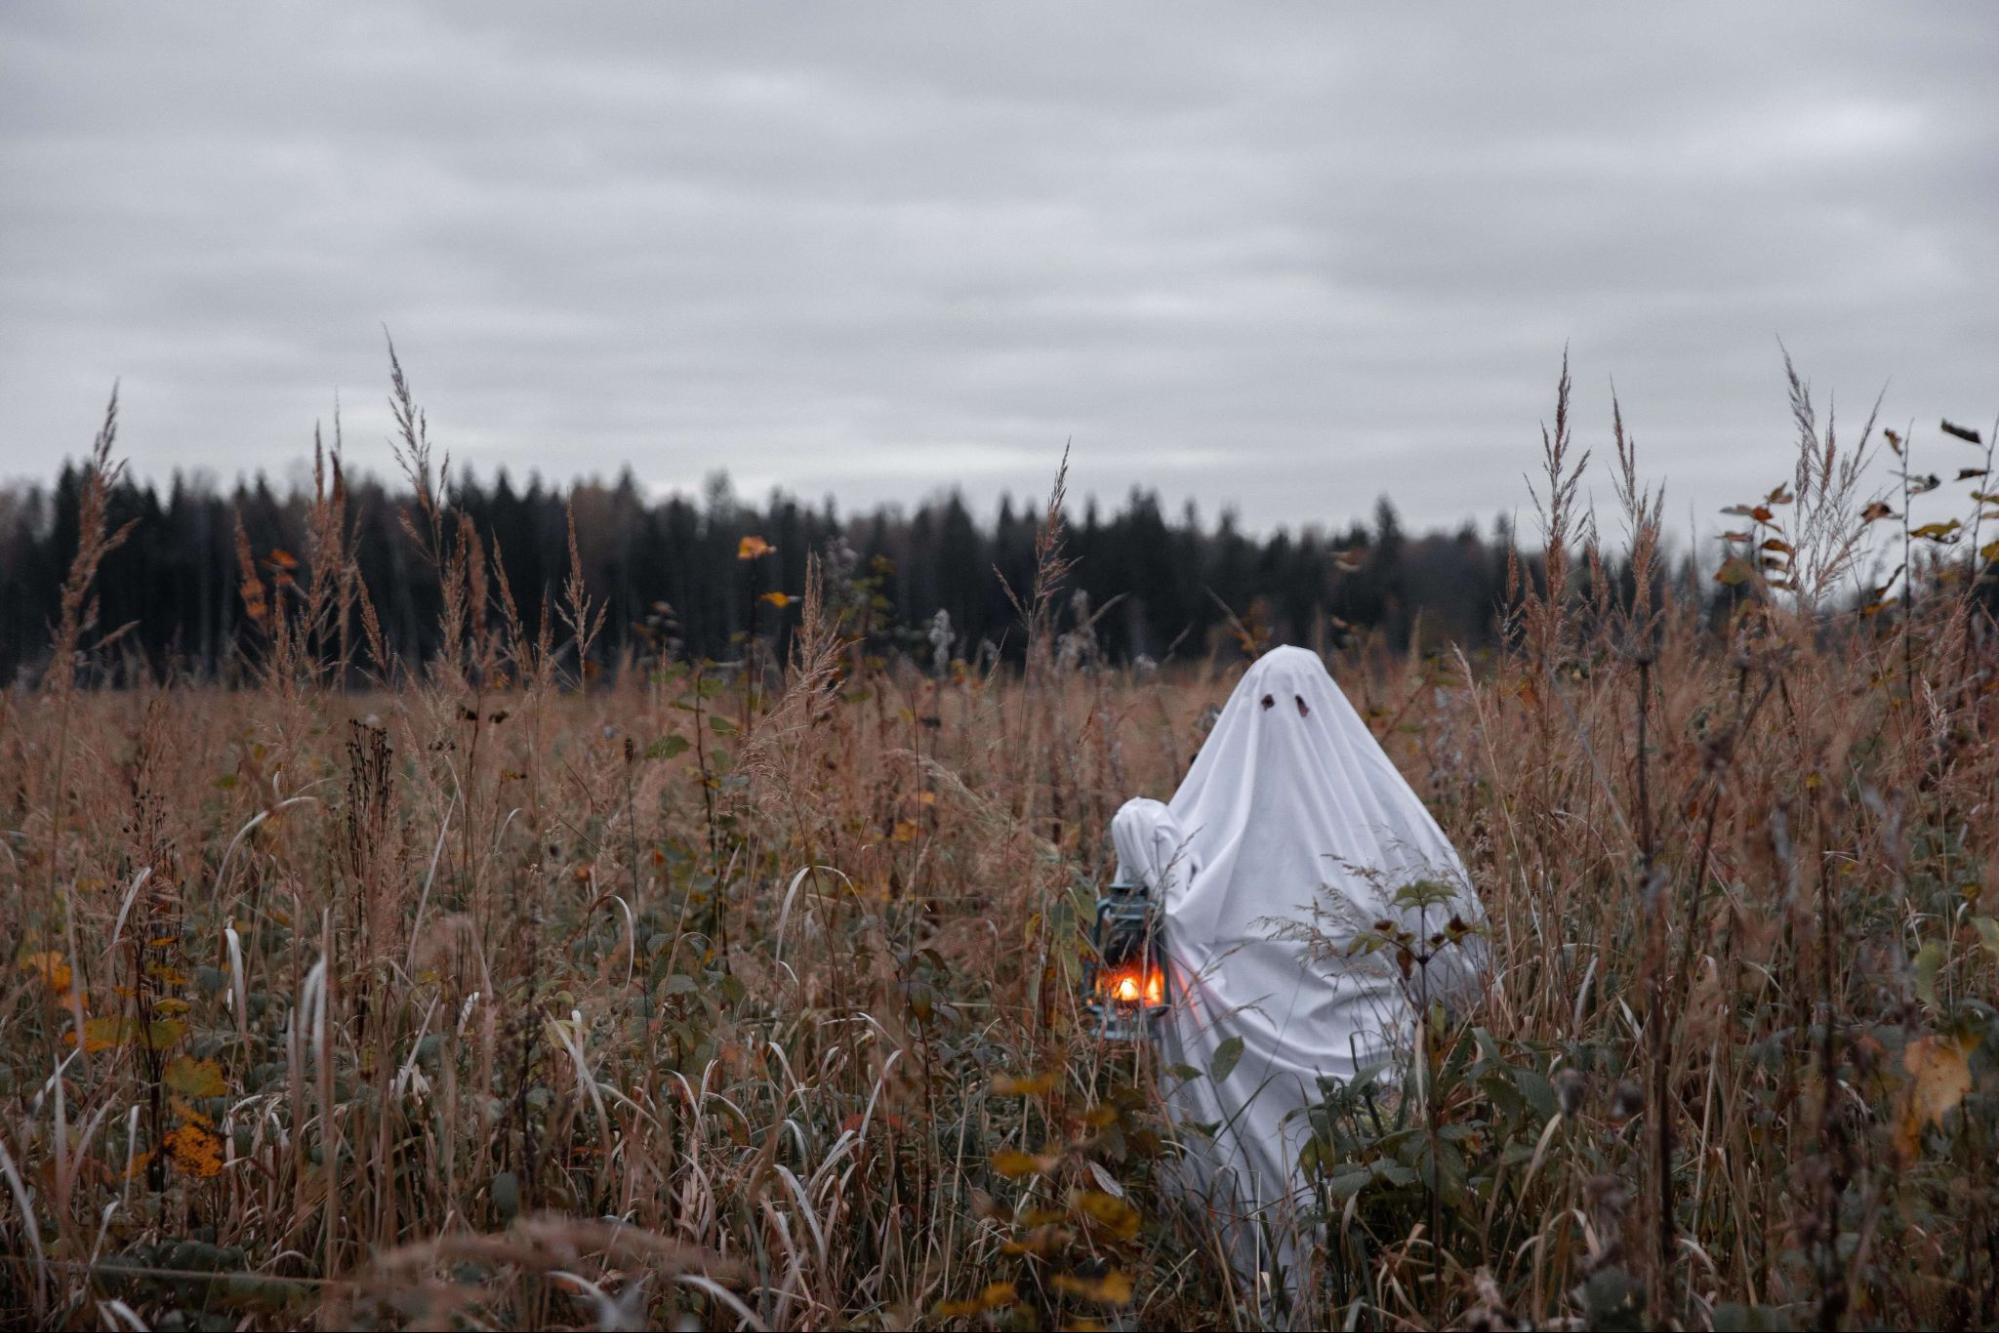 Ghost with a lantern in a field (photo: Monstera Production, Pexels.com)